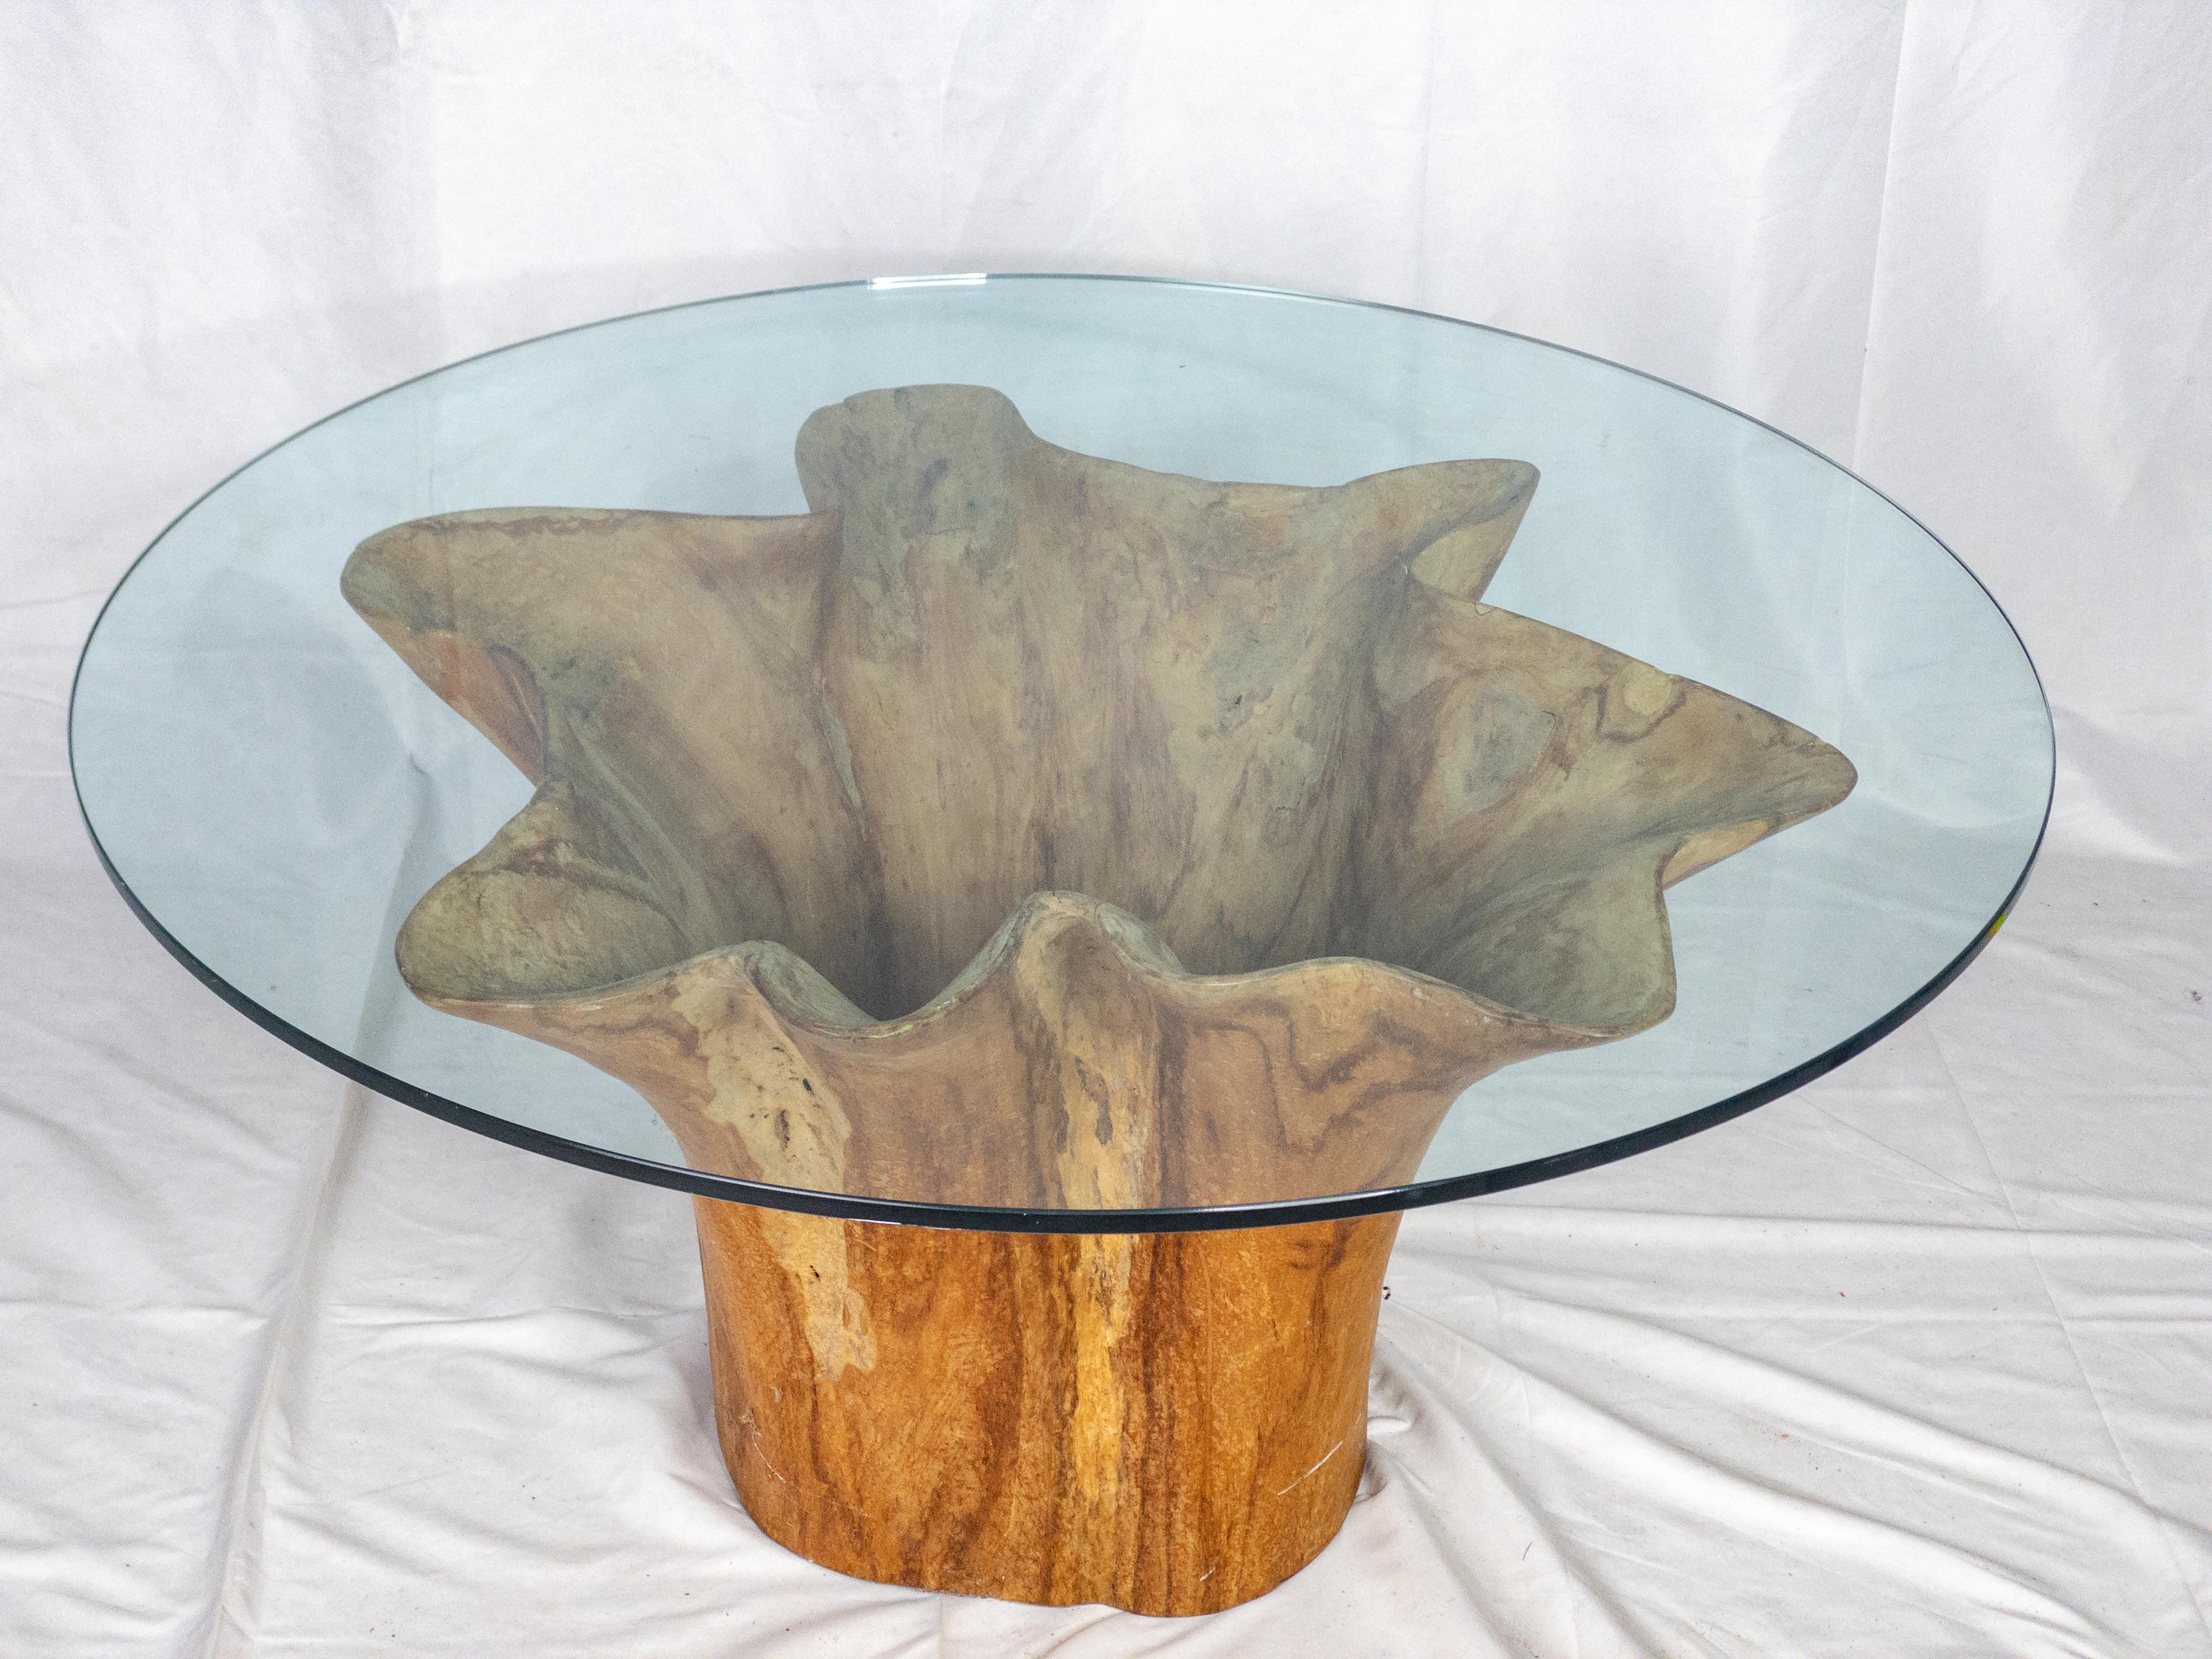 The Teak Tree Trunk Coffee Table is a stunning piece of furniture that seamlessly blends the raw beauty of nature with functional design. Crafted from a teak tree trunk, it celebrates the innate elegance of organic forms. The trunk's natural shape,